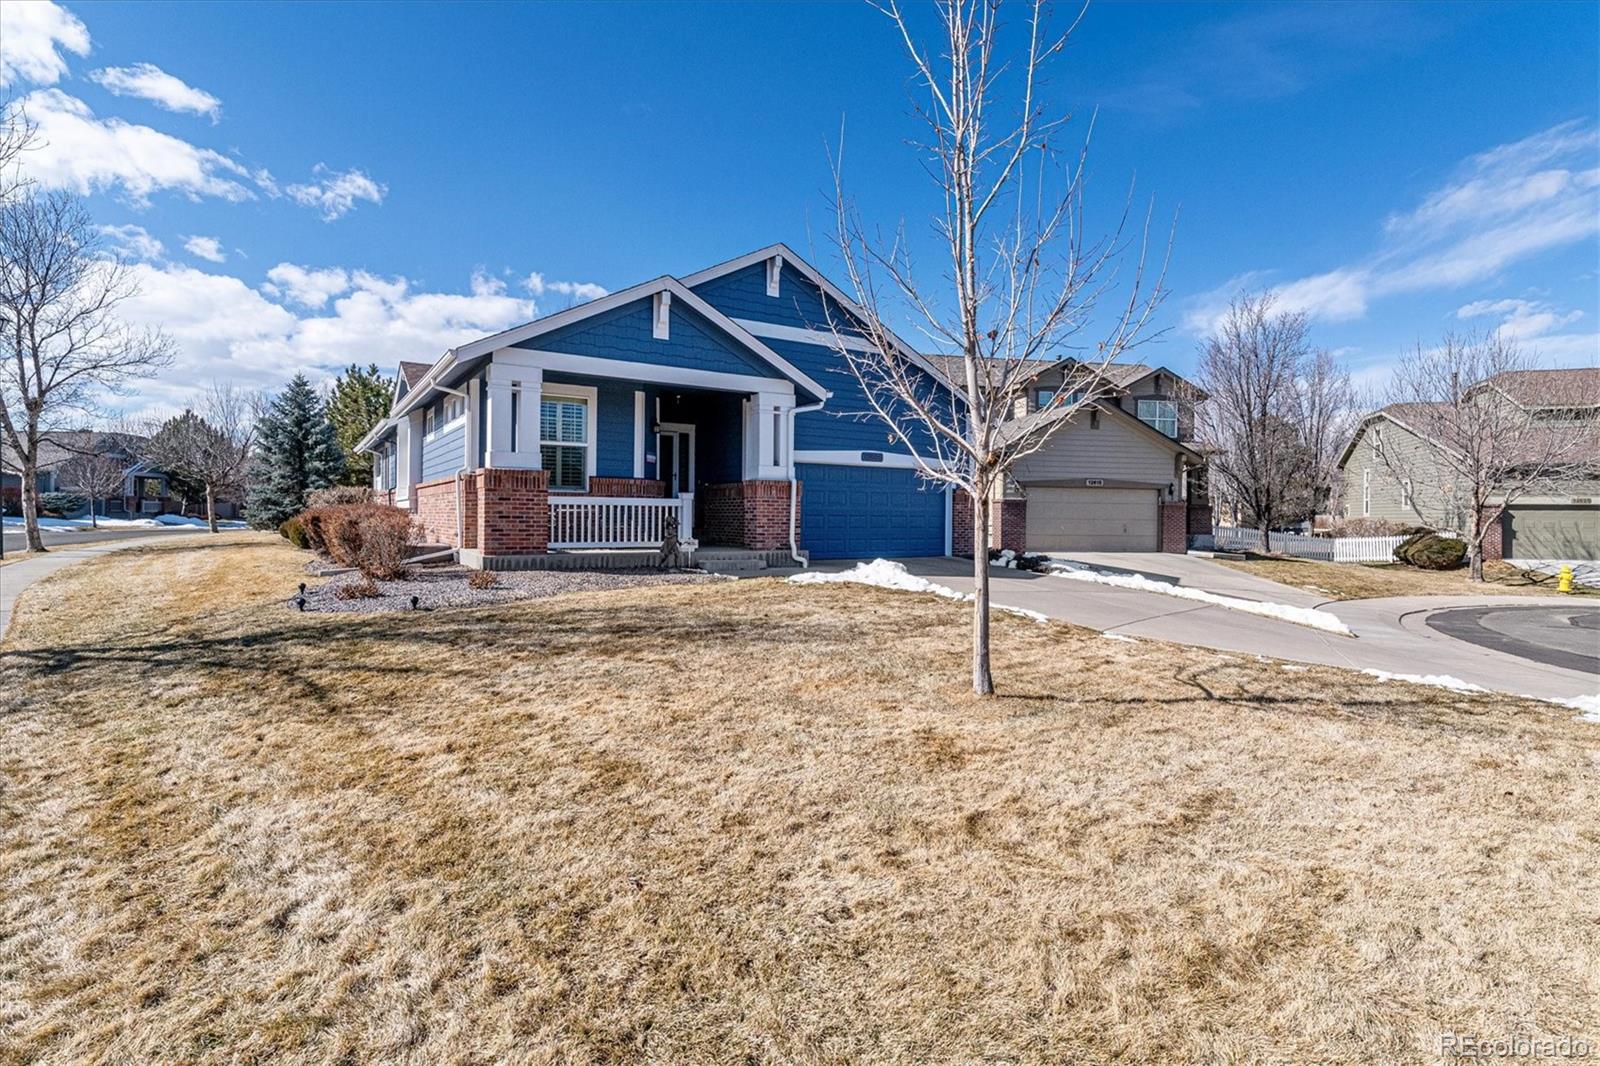 12605  hazel court, broomfield sold home. Closed on 2024-04-18 for $699,000.